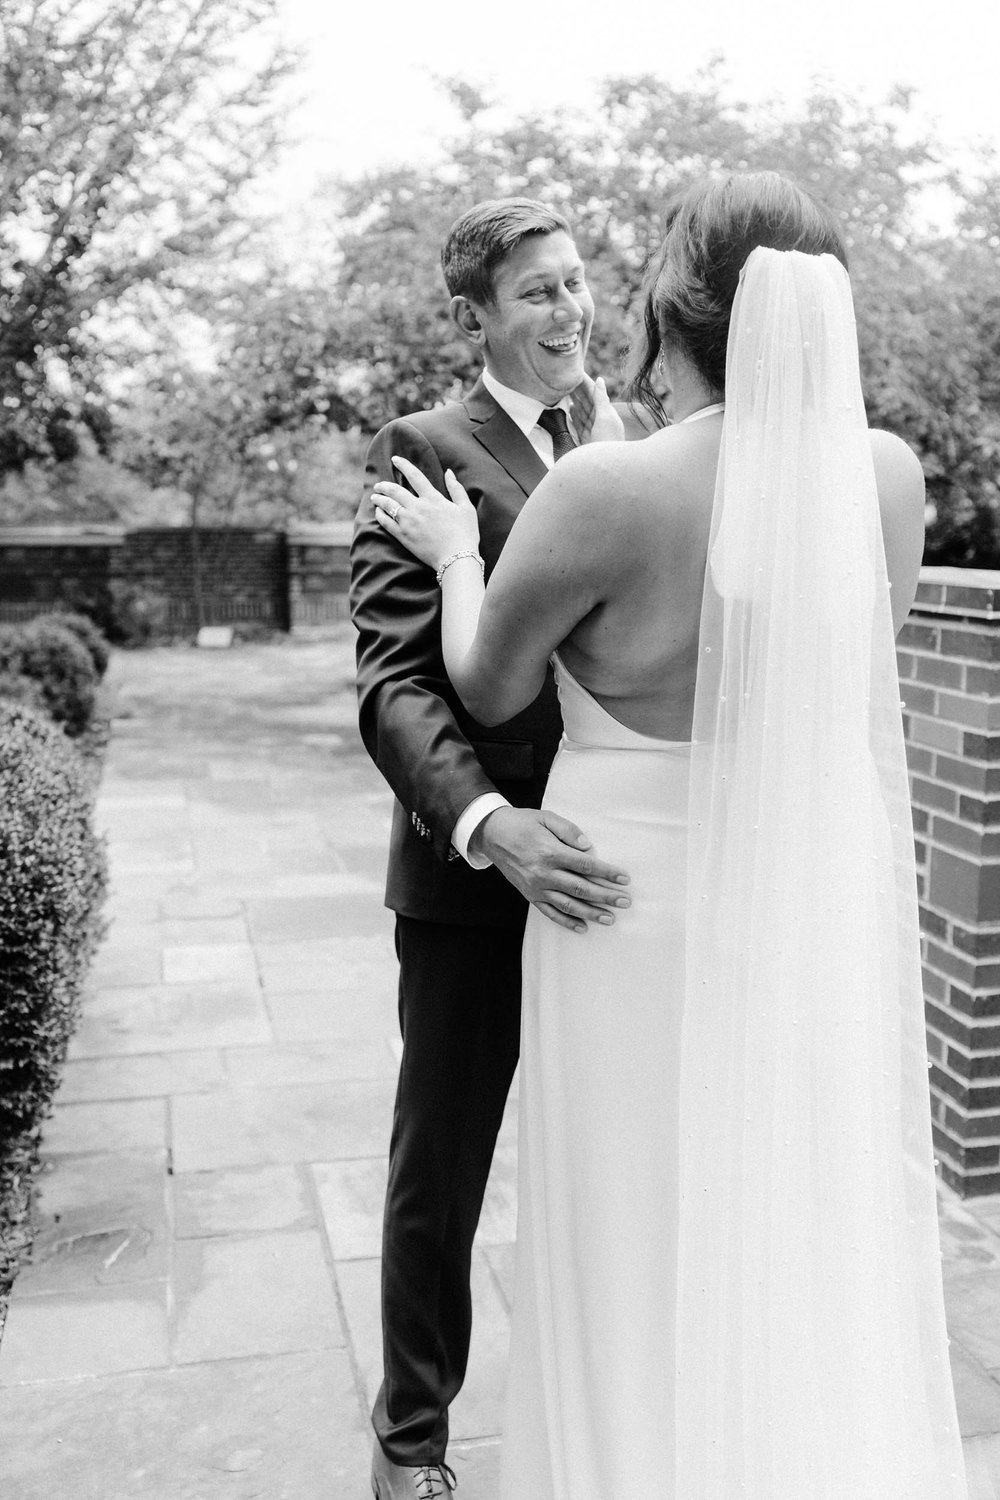  A bride and groom laughing and smiling while sharing an intimate first look before their wedding ceremony 